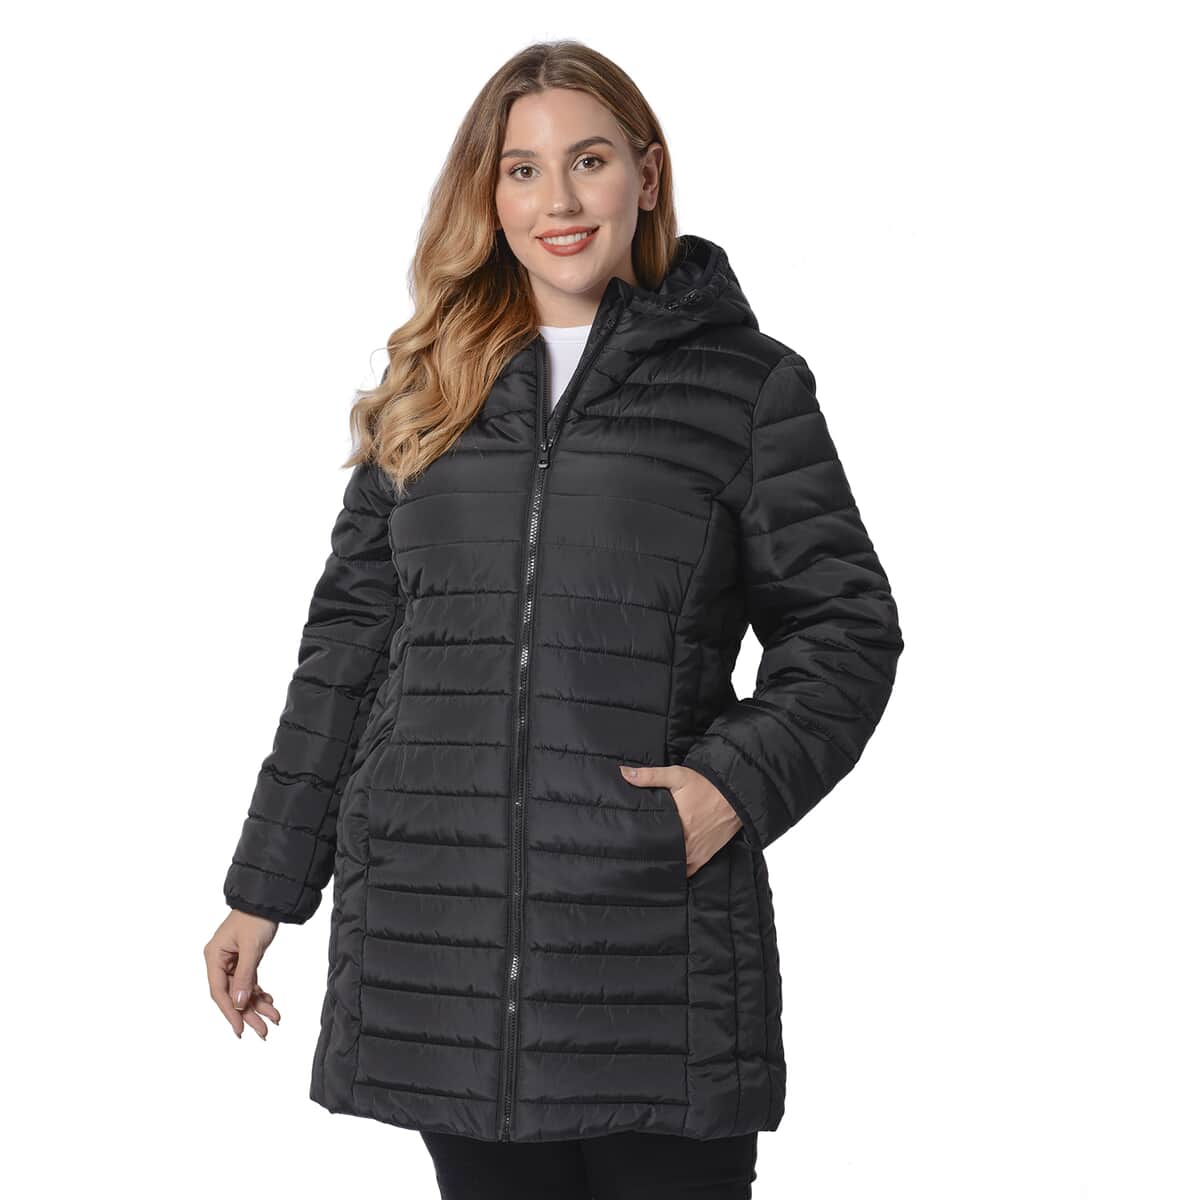 Passage Black Long Puffer Coat with Hood (S, 100% Polyester) image number 0